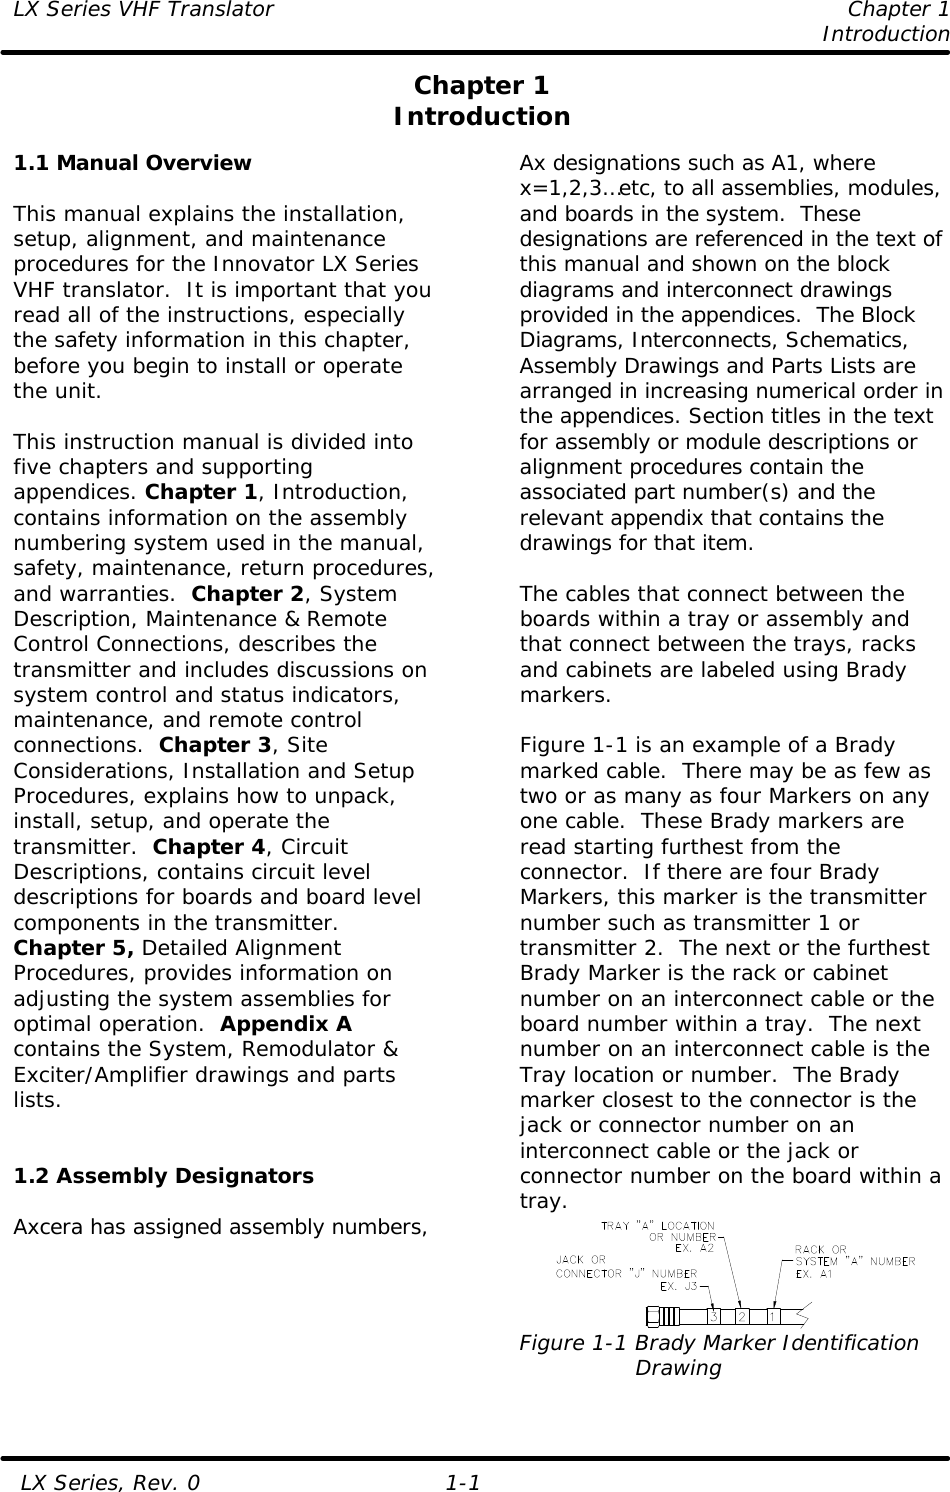 LX Series VHF Translator    Chapter 1     Introduction   LX Series, Rev. 0 1-1 Chapter 1 Introduction  1.1 Manual Overview  This manual explains the installation, setup, alignment, and maintenance procedures for the Innovator LX Series VHF translator.  It is important that you read all of the instructions, especially the safety information in this chapter, before you begin to install or operate the unit.  This instruction manual is divided into five chapters and supporting appendices. Chapter 1, Introduction, contains information on the assembly numbering system used in the manual, safety, maintenance, return procedures, and warranties.  Chapter 2, System Description, Maintenance &amp; Remote Control Connections, describes the transmitter and includes discussions on system control and status indicators, maintenance, and remote control connections.  Chapter 3, Site Considerations, Installation and Setup Procedures, explains how to unpack, install, setup, and operate the transmitter.  Chapter 4, Circuit Descriptions, contains circuit level descriptions for boards and board level components in the transmitter.  Chapter 5, Detailed Alignment Procedures, provides information on adjusting the system assemblies for optimal operation.  Appendix A contains the System, Remodulator &amp; Exciter/Amplifier drawings and parts lists.   1.2 Assembly Designators  Axcera has assigned assembly numbers, Ax designations such as A1, where x=1,2,3…etc, to all assemblies, modules, and boards in the system.  These designations are referenced in the text of this manual and shown on the block diagrams and interconnect drawings provided in the appendices.  The Block Diagrams, Interconnects, Schematics, Assembly Drawings and Parts Lists are arranged in increasing numerical order in the appendices. Section titles in the text for assembly or module descriptions or alignment procedures contain the associated part number(s) and the relevant appendix that contains the drawings for that item.   The cables that connect between the boards within a tray or assembly and that connect between the trays, racks and cabinets are labeled using Brady markers.   Figure 1-1 is an example of a Brady marked cable.  There may be as few as two or as many as four Markers on any one cable.  These Brady markers are read starting furthest from the connector.  If there are four Brady Markers, this marker is the transmitter number such as transmitter 1 or transmitter 2.  The next or the furthest Brady Marker is the rack or cabinet number on an interconnect cable or the board number within a tray.  The next number on an interconnect cable is the Tray location or number.  The Brady marker closest to the connector is the jack or connector number on an interconnect cable or the jack or connector number on the board within a tray.  Figure 1-1 Brady Marker Identification                 Drawing  